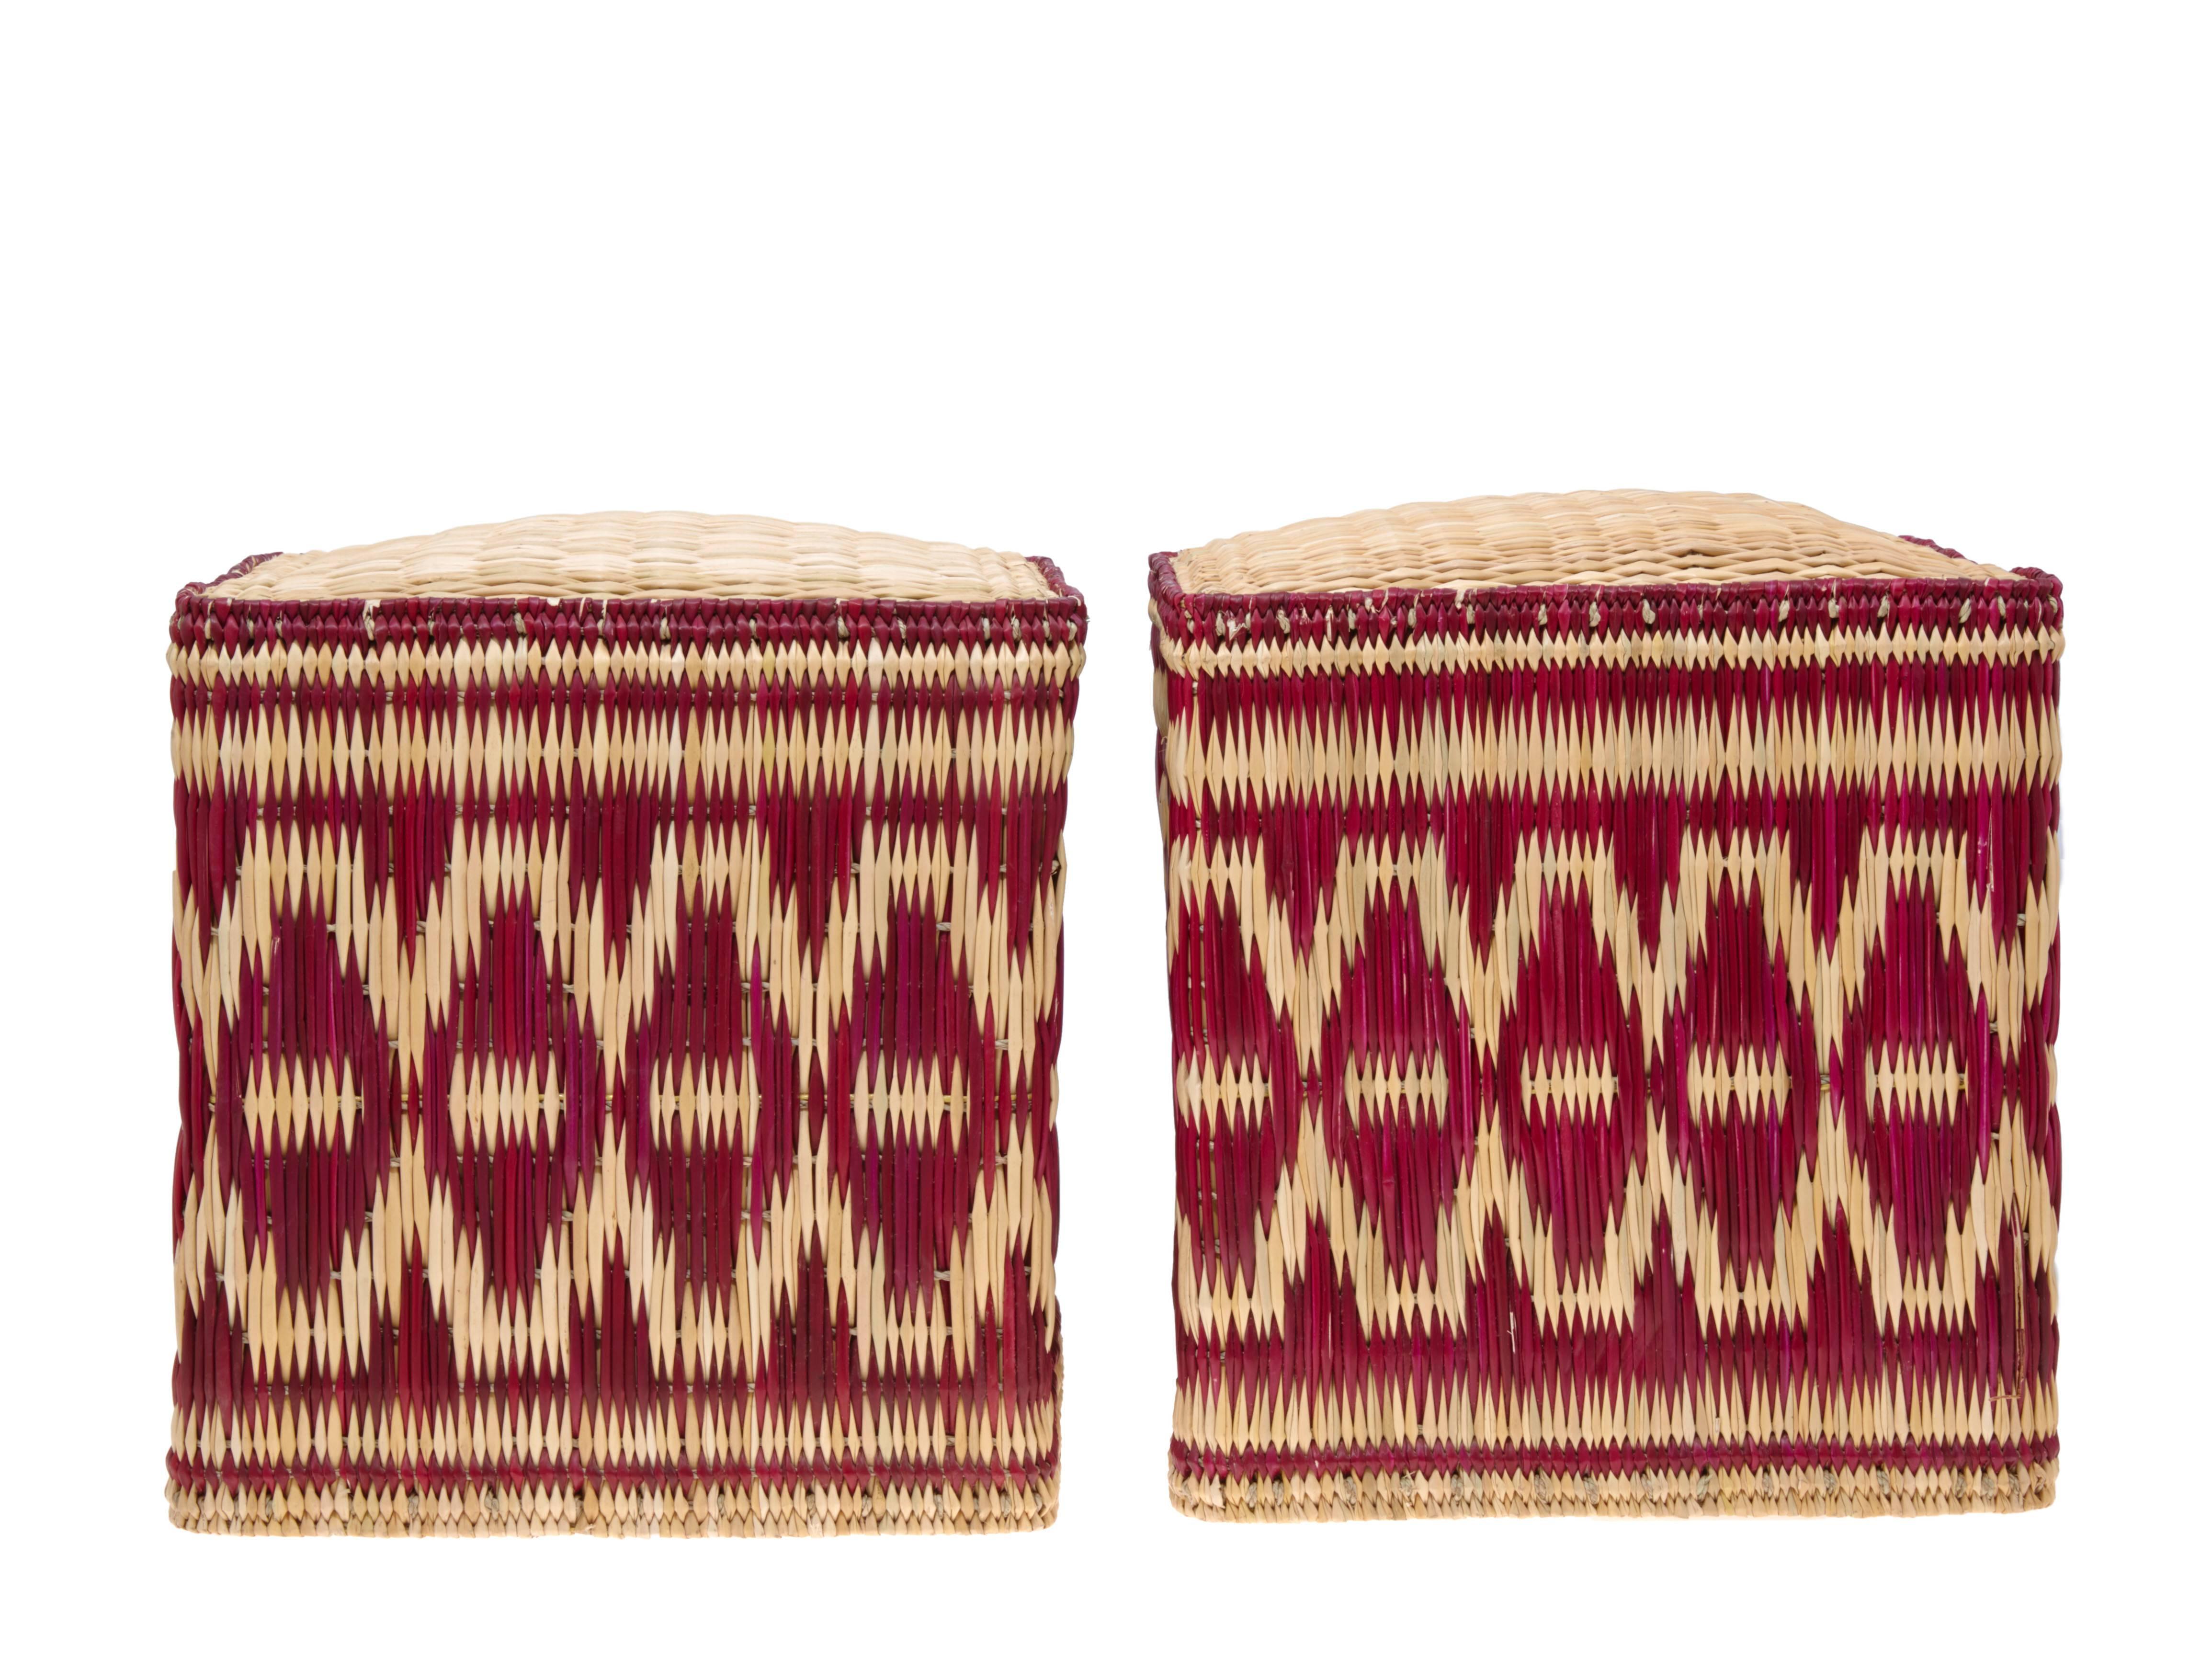 Pair of handwoven wicker stools or small tables with a naturally dyed decorative border.

Price is £800 per pair.